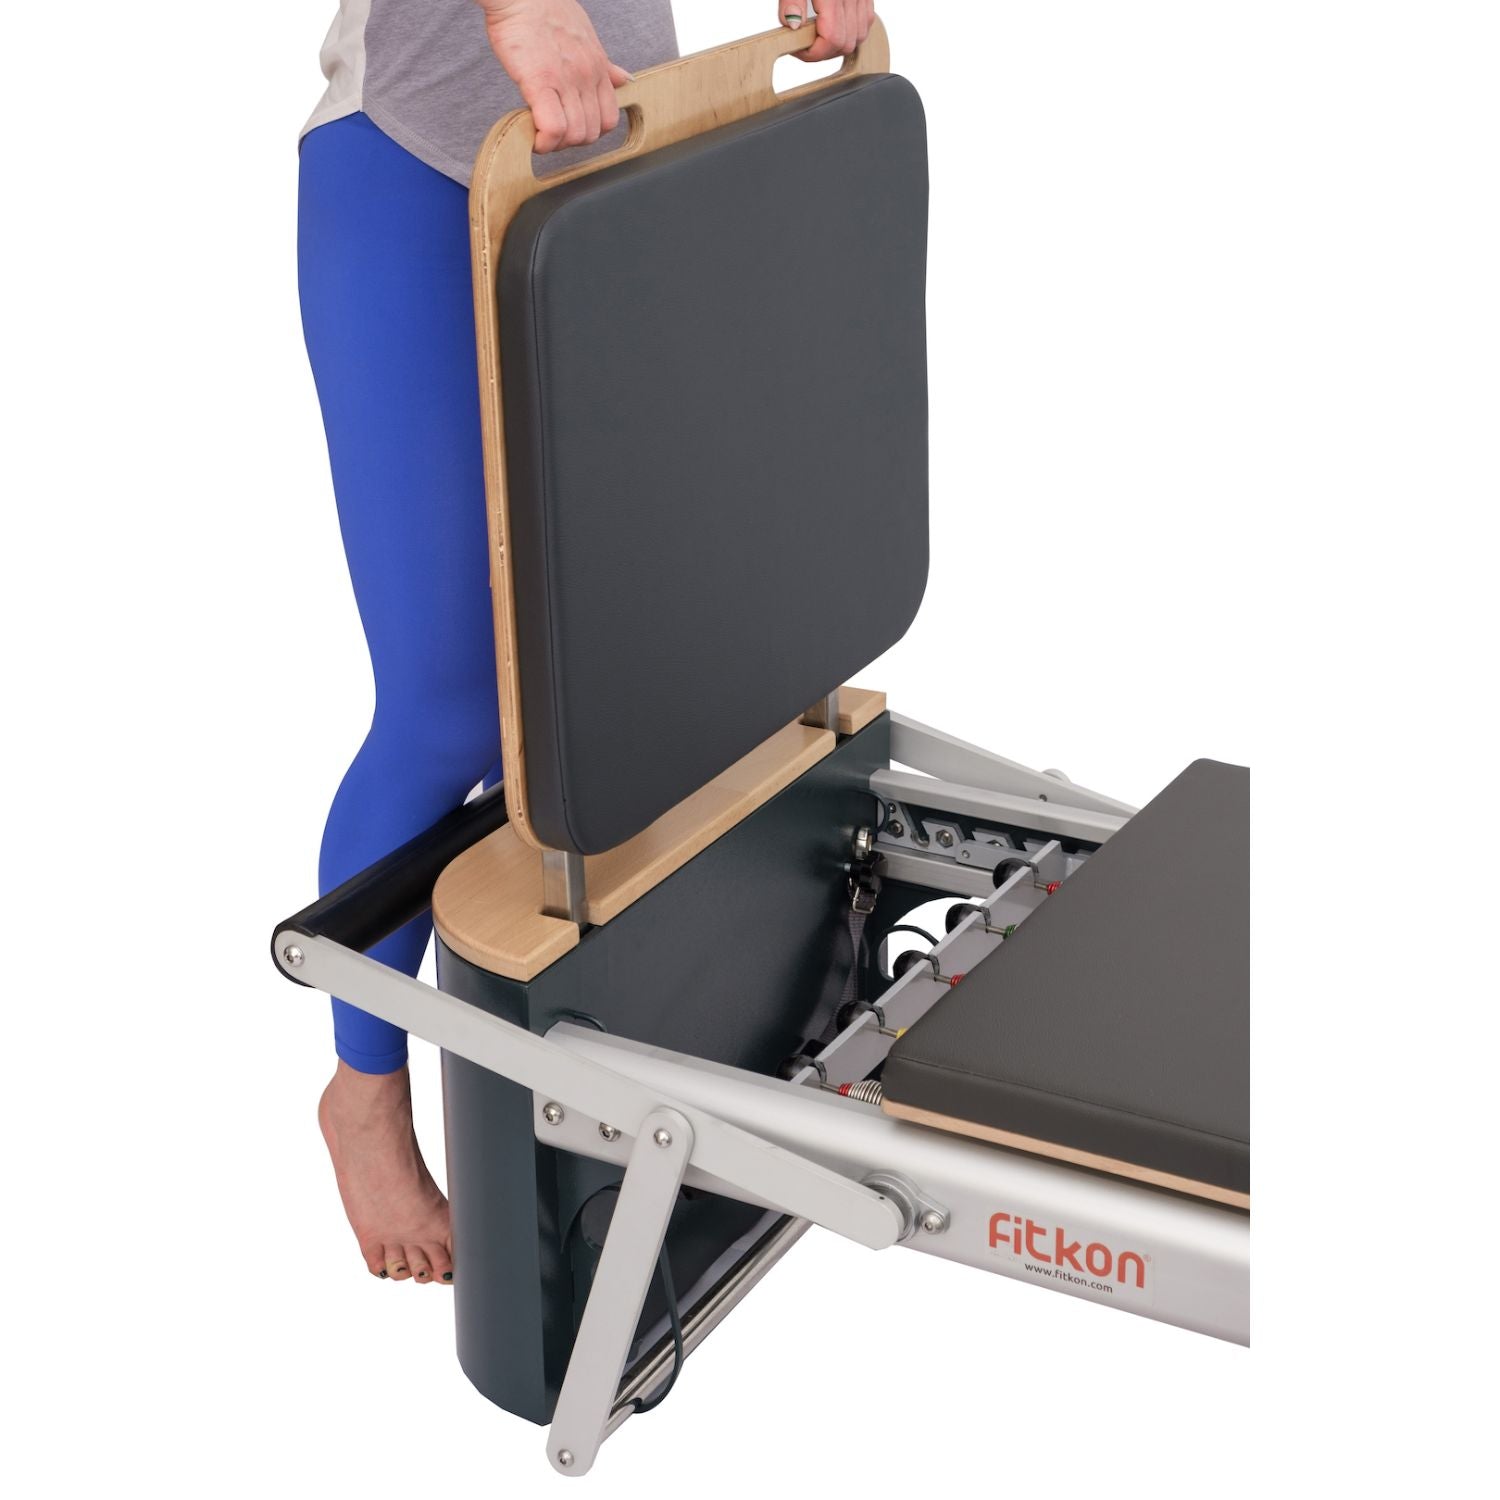 Buy Peak Pilates Fit Reformer Machine with Free Shipping – Pilates